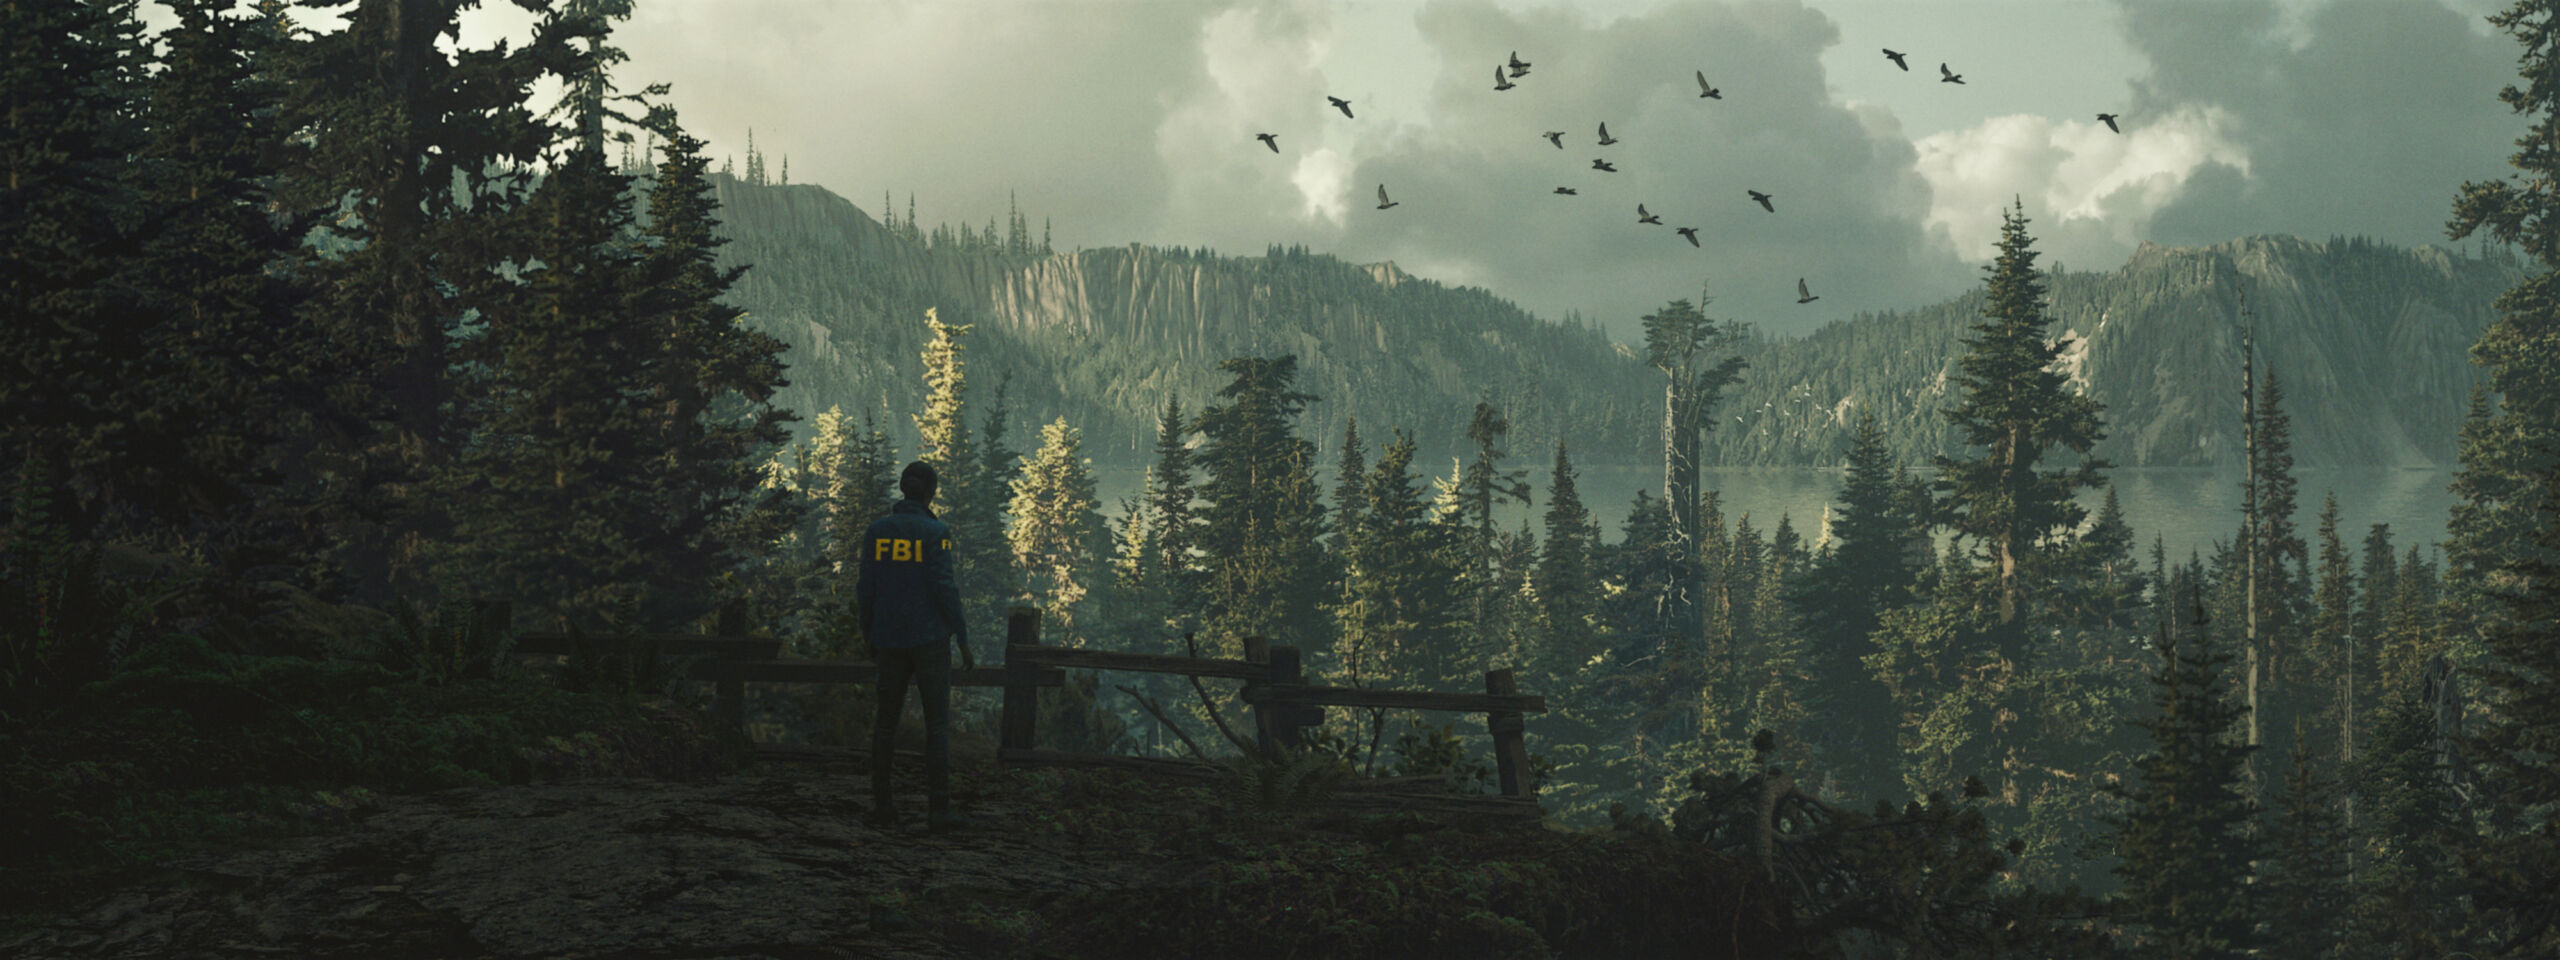 Here are some brand new concept art for Alan Wake 2